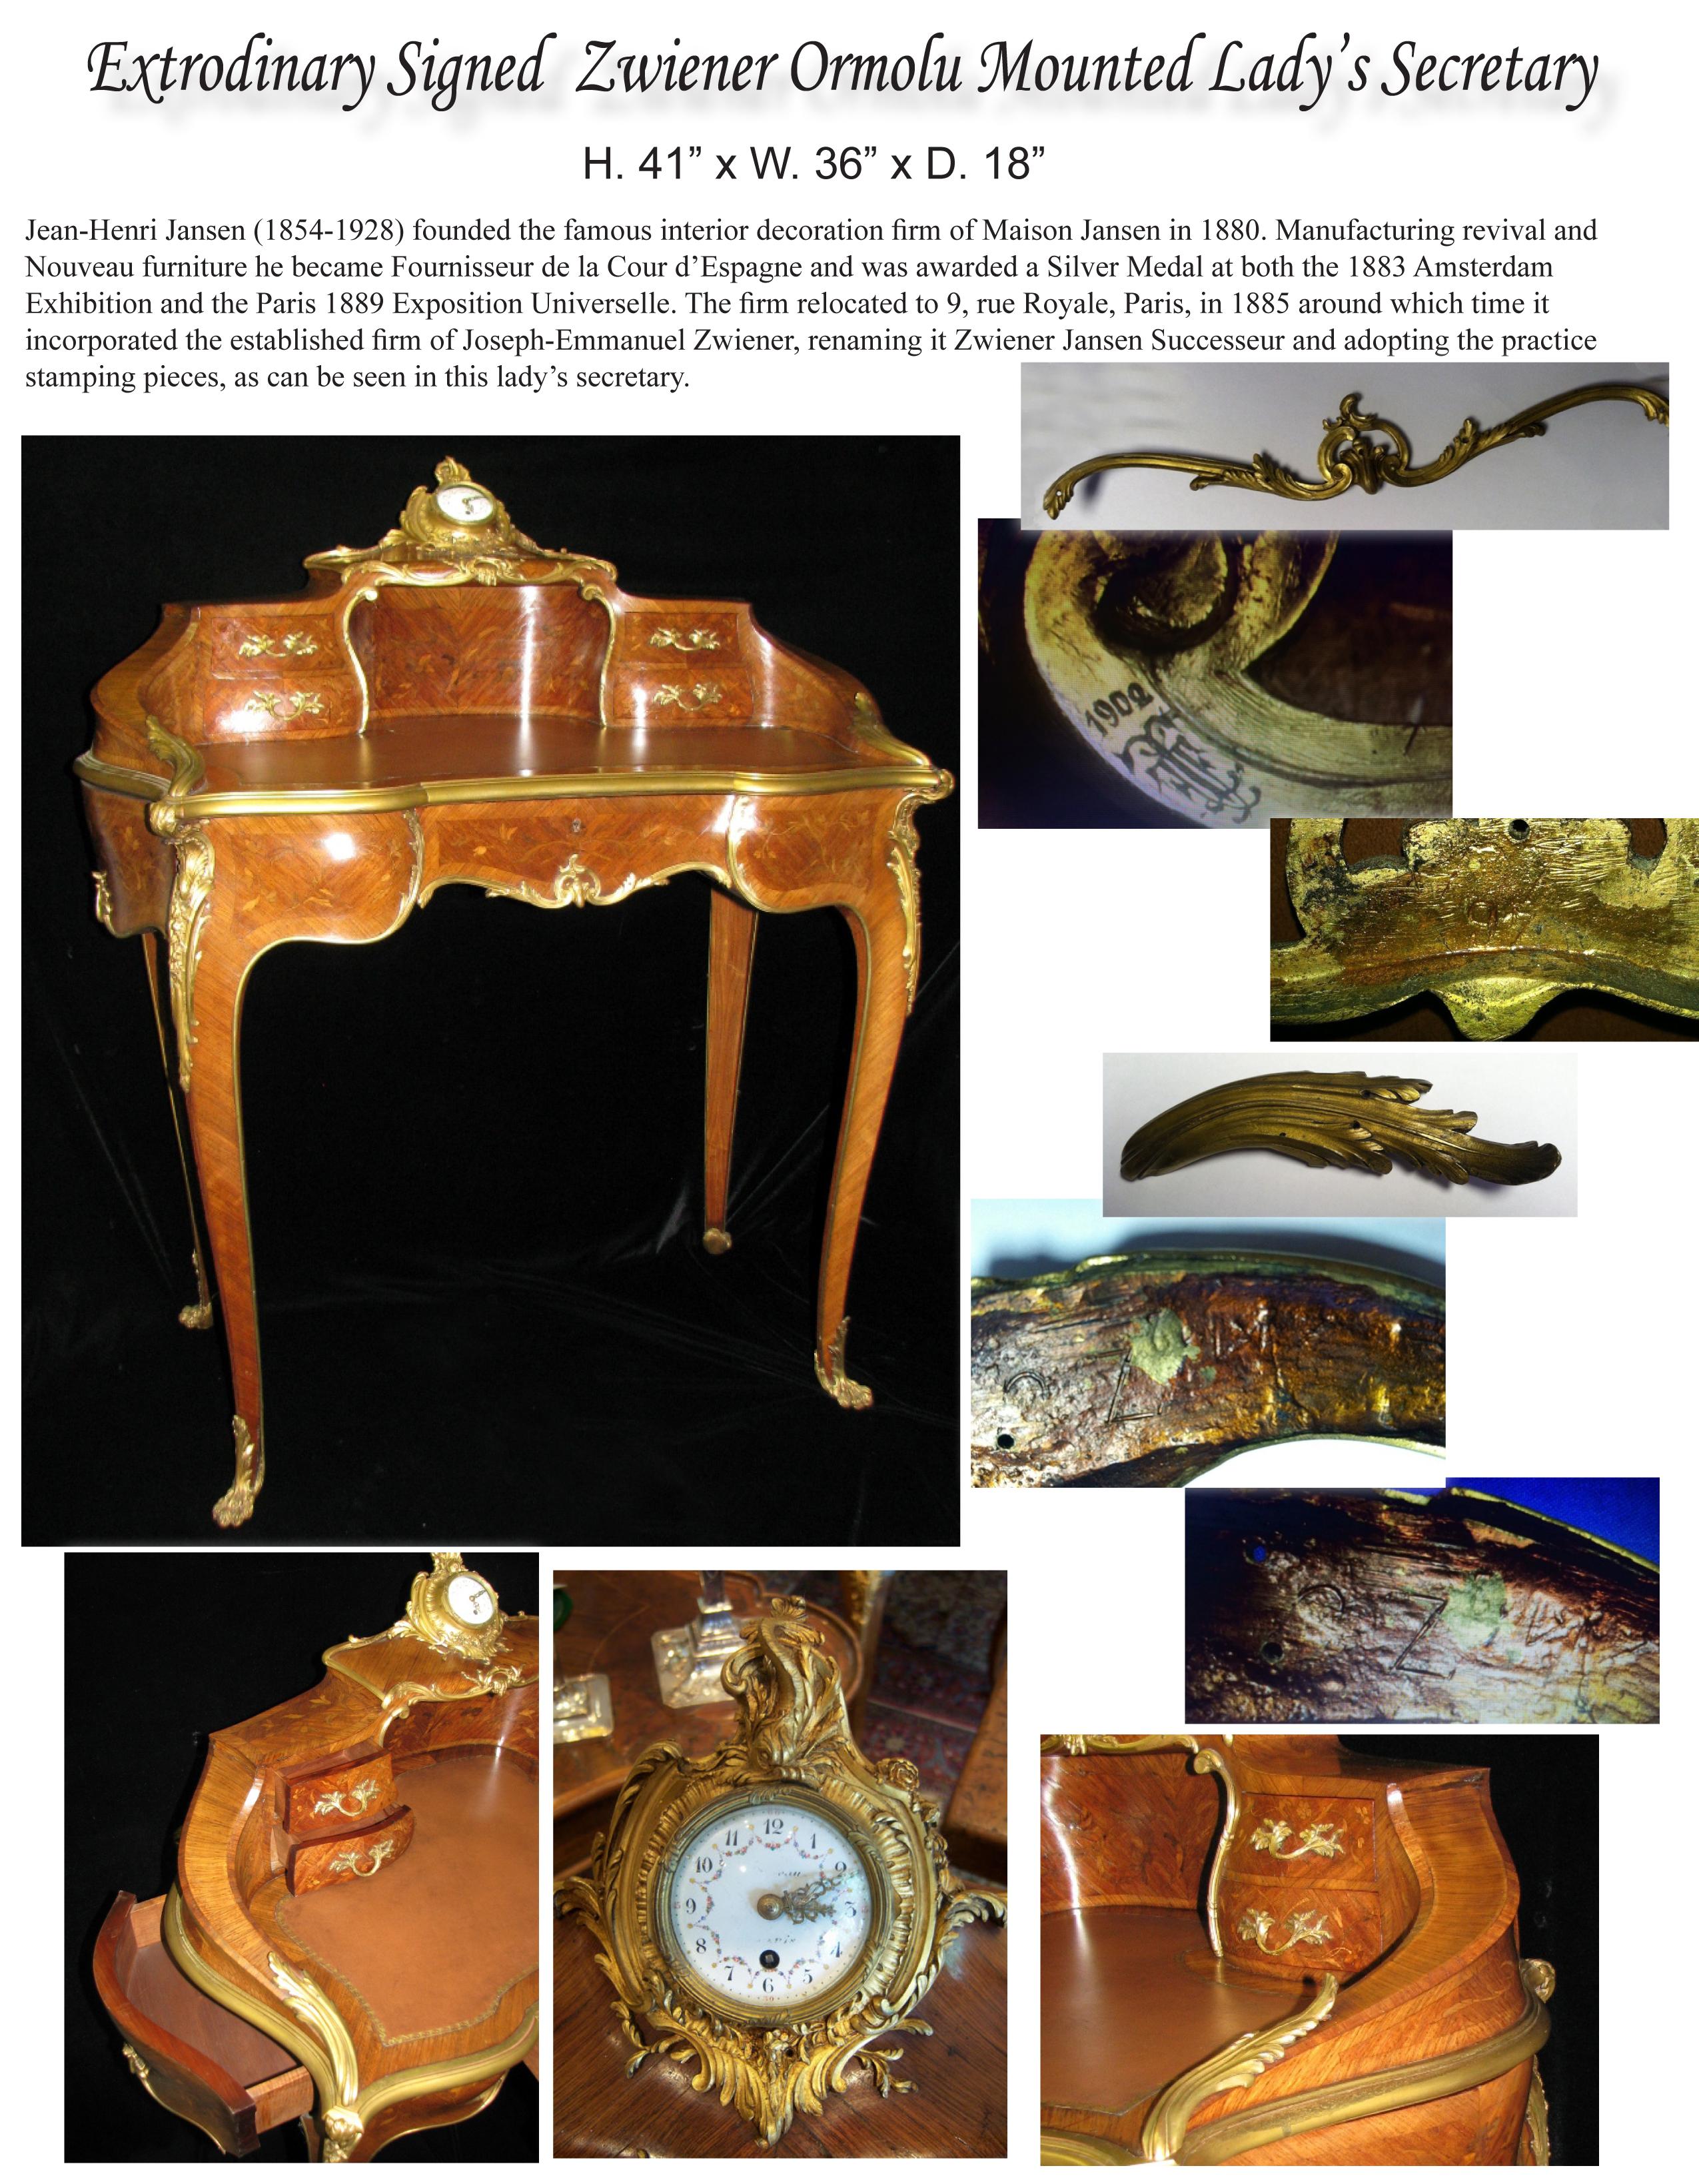 Hand-Crafted Extraordinary Signed Zwiener Ormolu Mounted Lady's Secretary For Sale